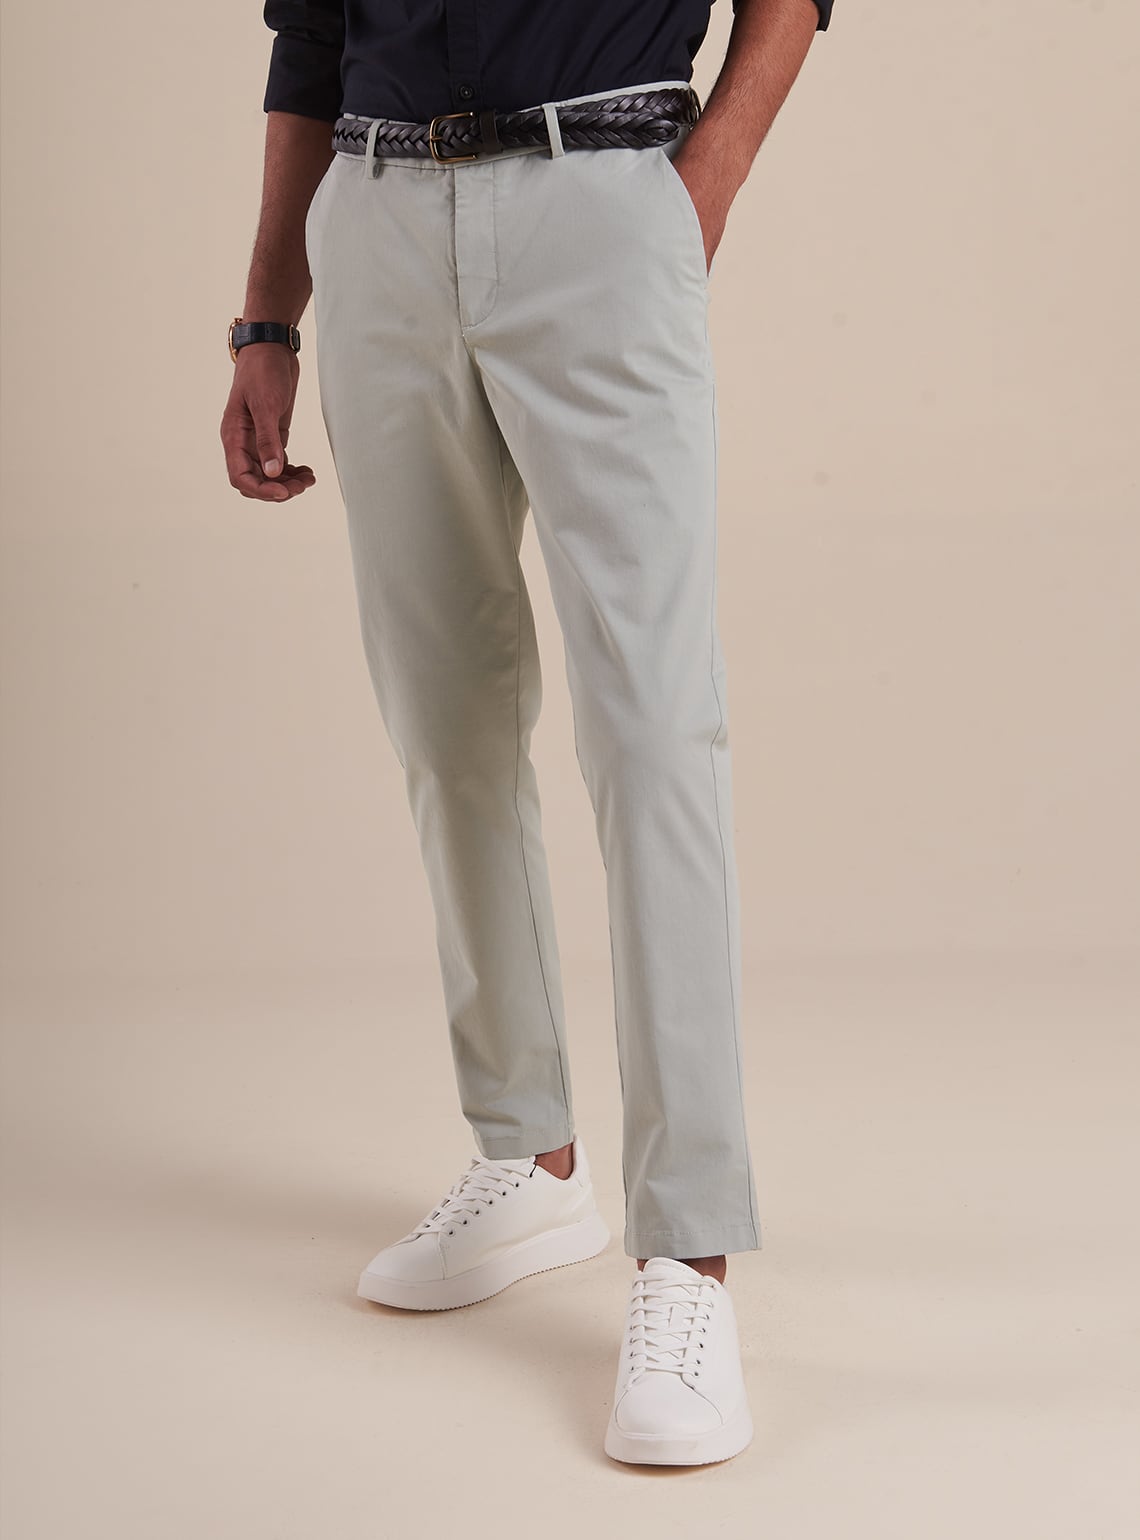 Buy Silver Chino  Casual Light Grey Solid Chinos for Men Online  Andamen